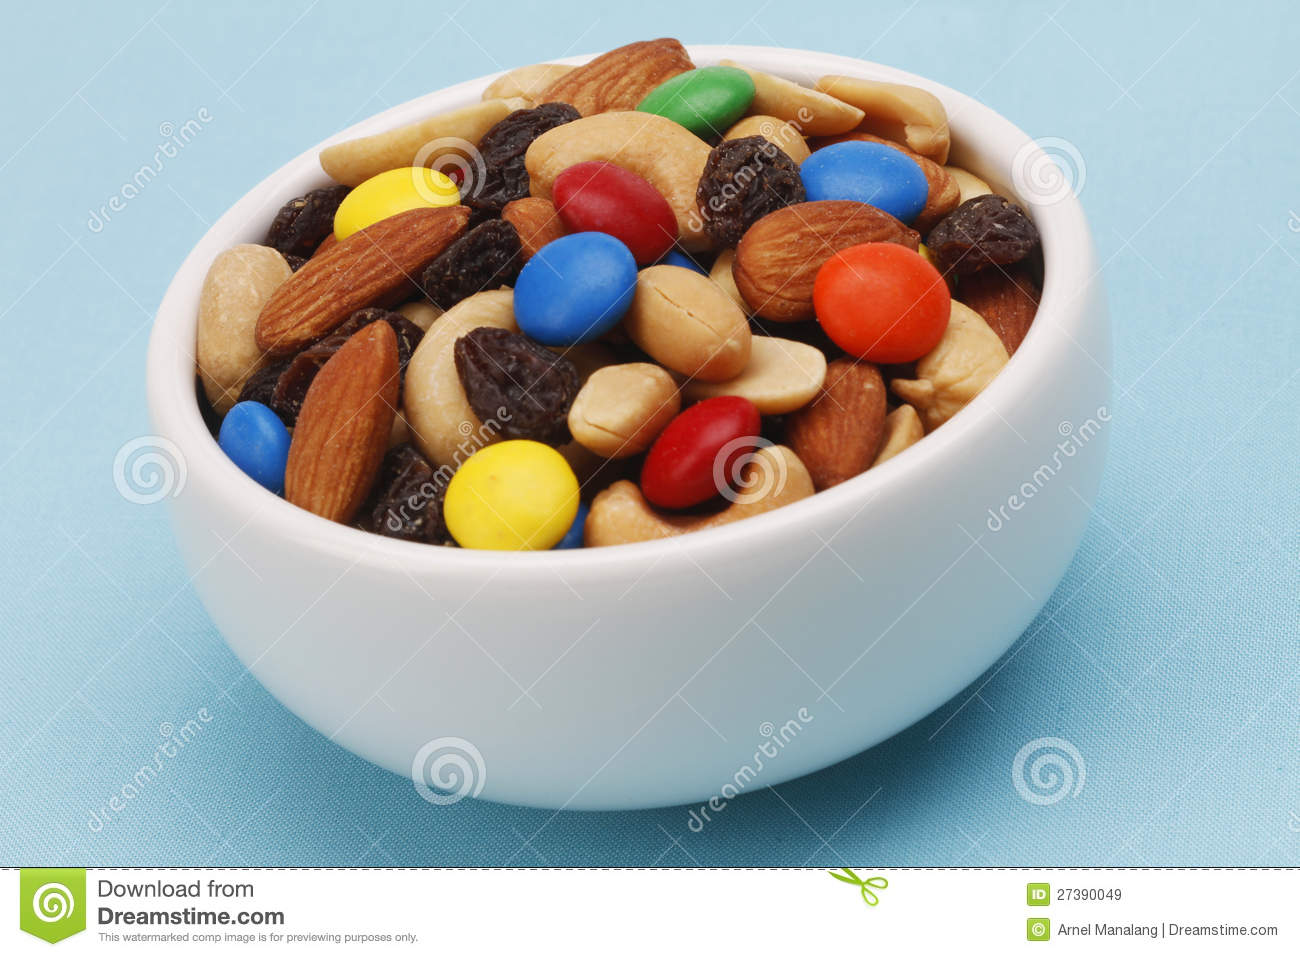 Trail Mix Royalty Free Stock Images   Image  27390049